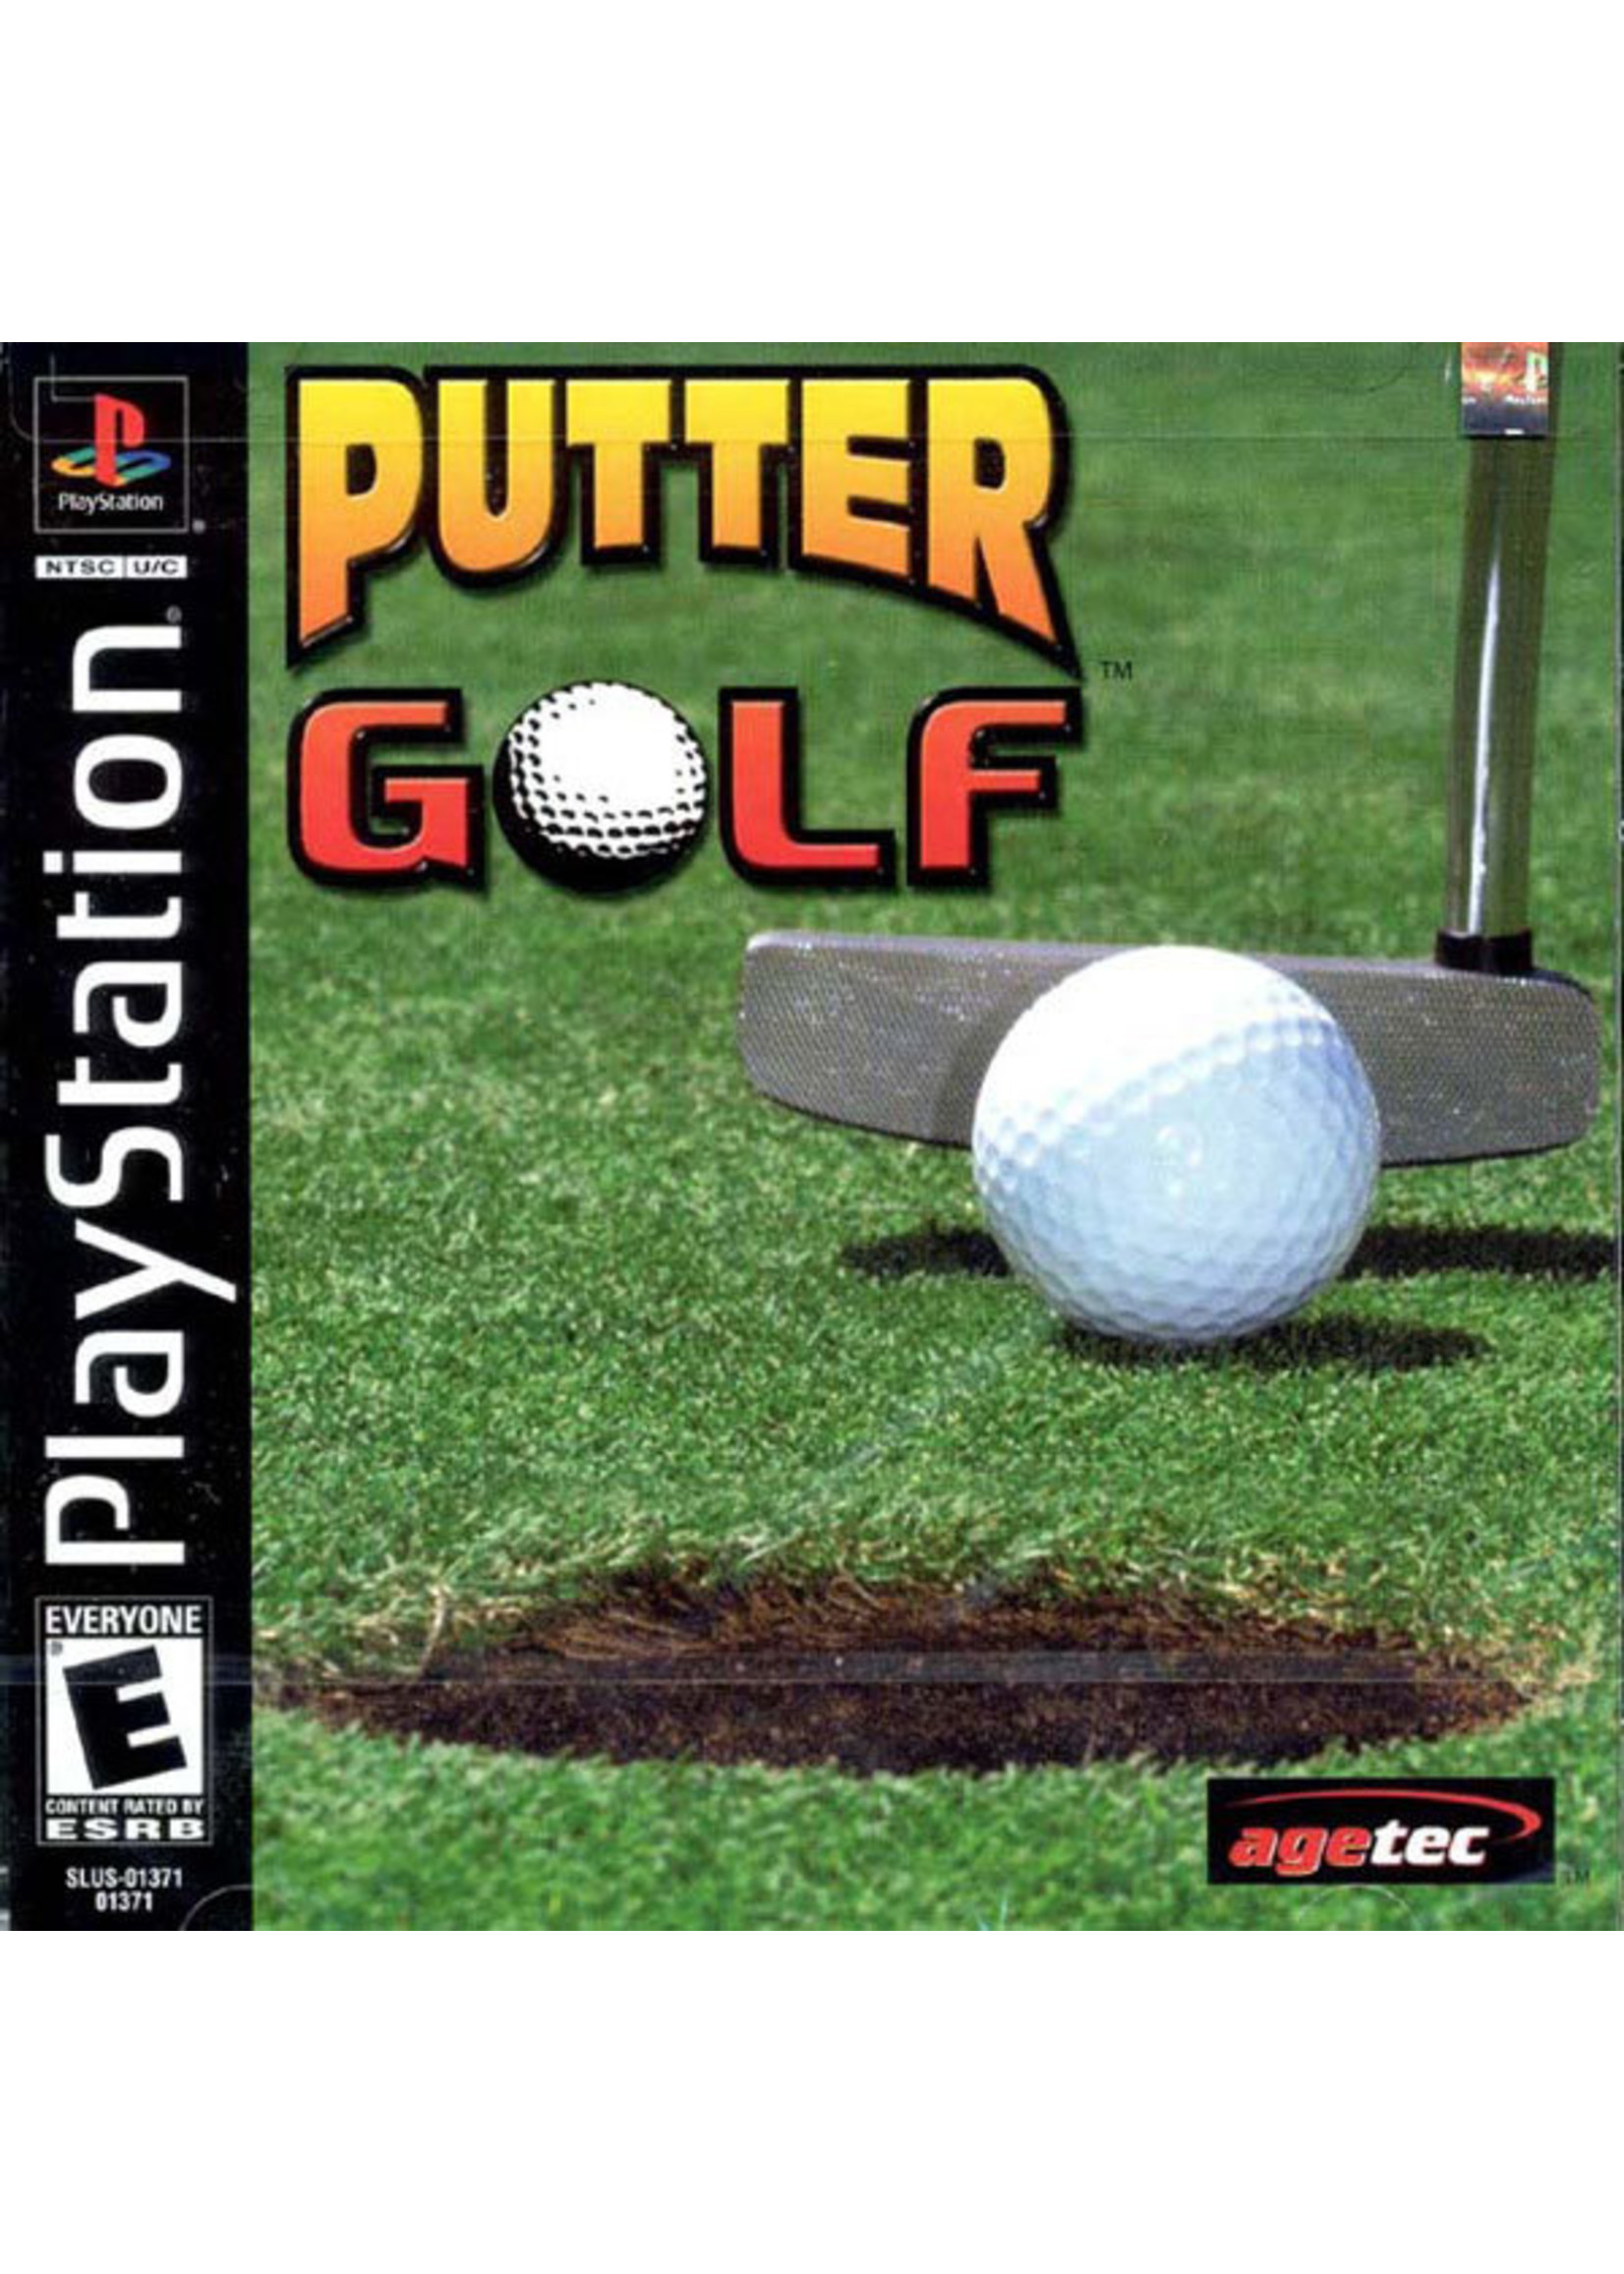 Sony Playstation 1 (PS1) Putter Golf